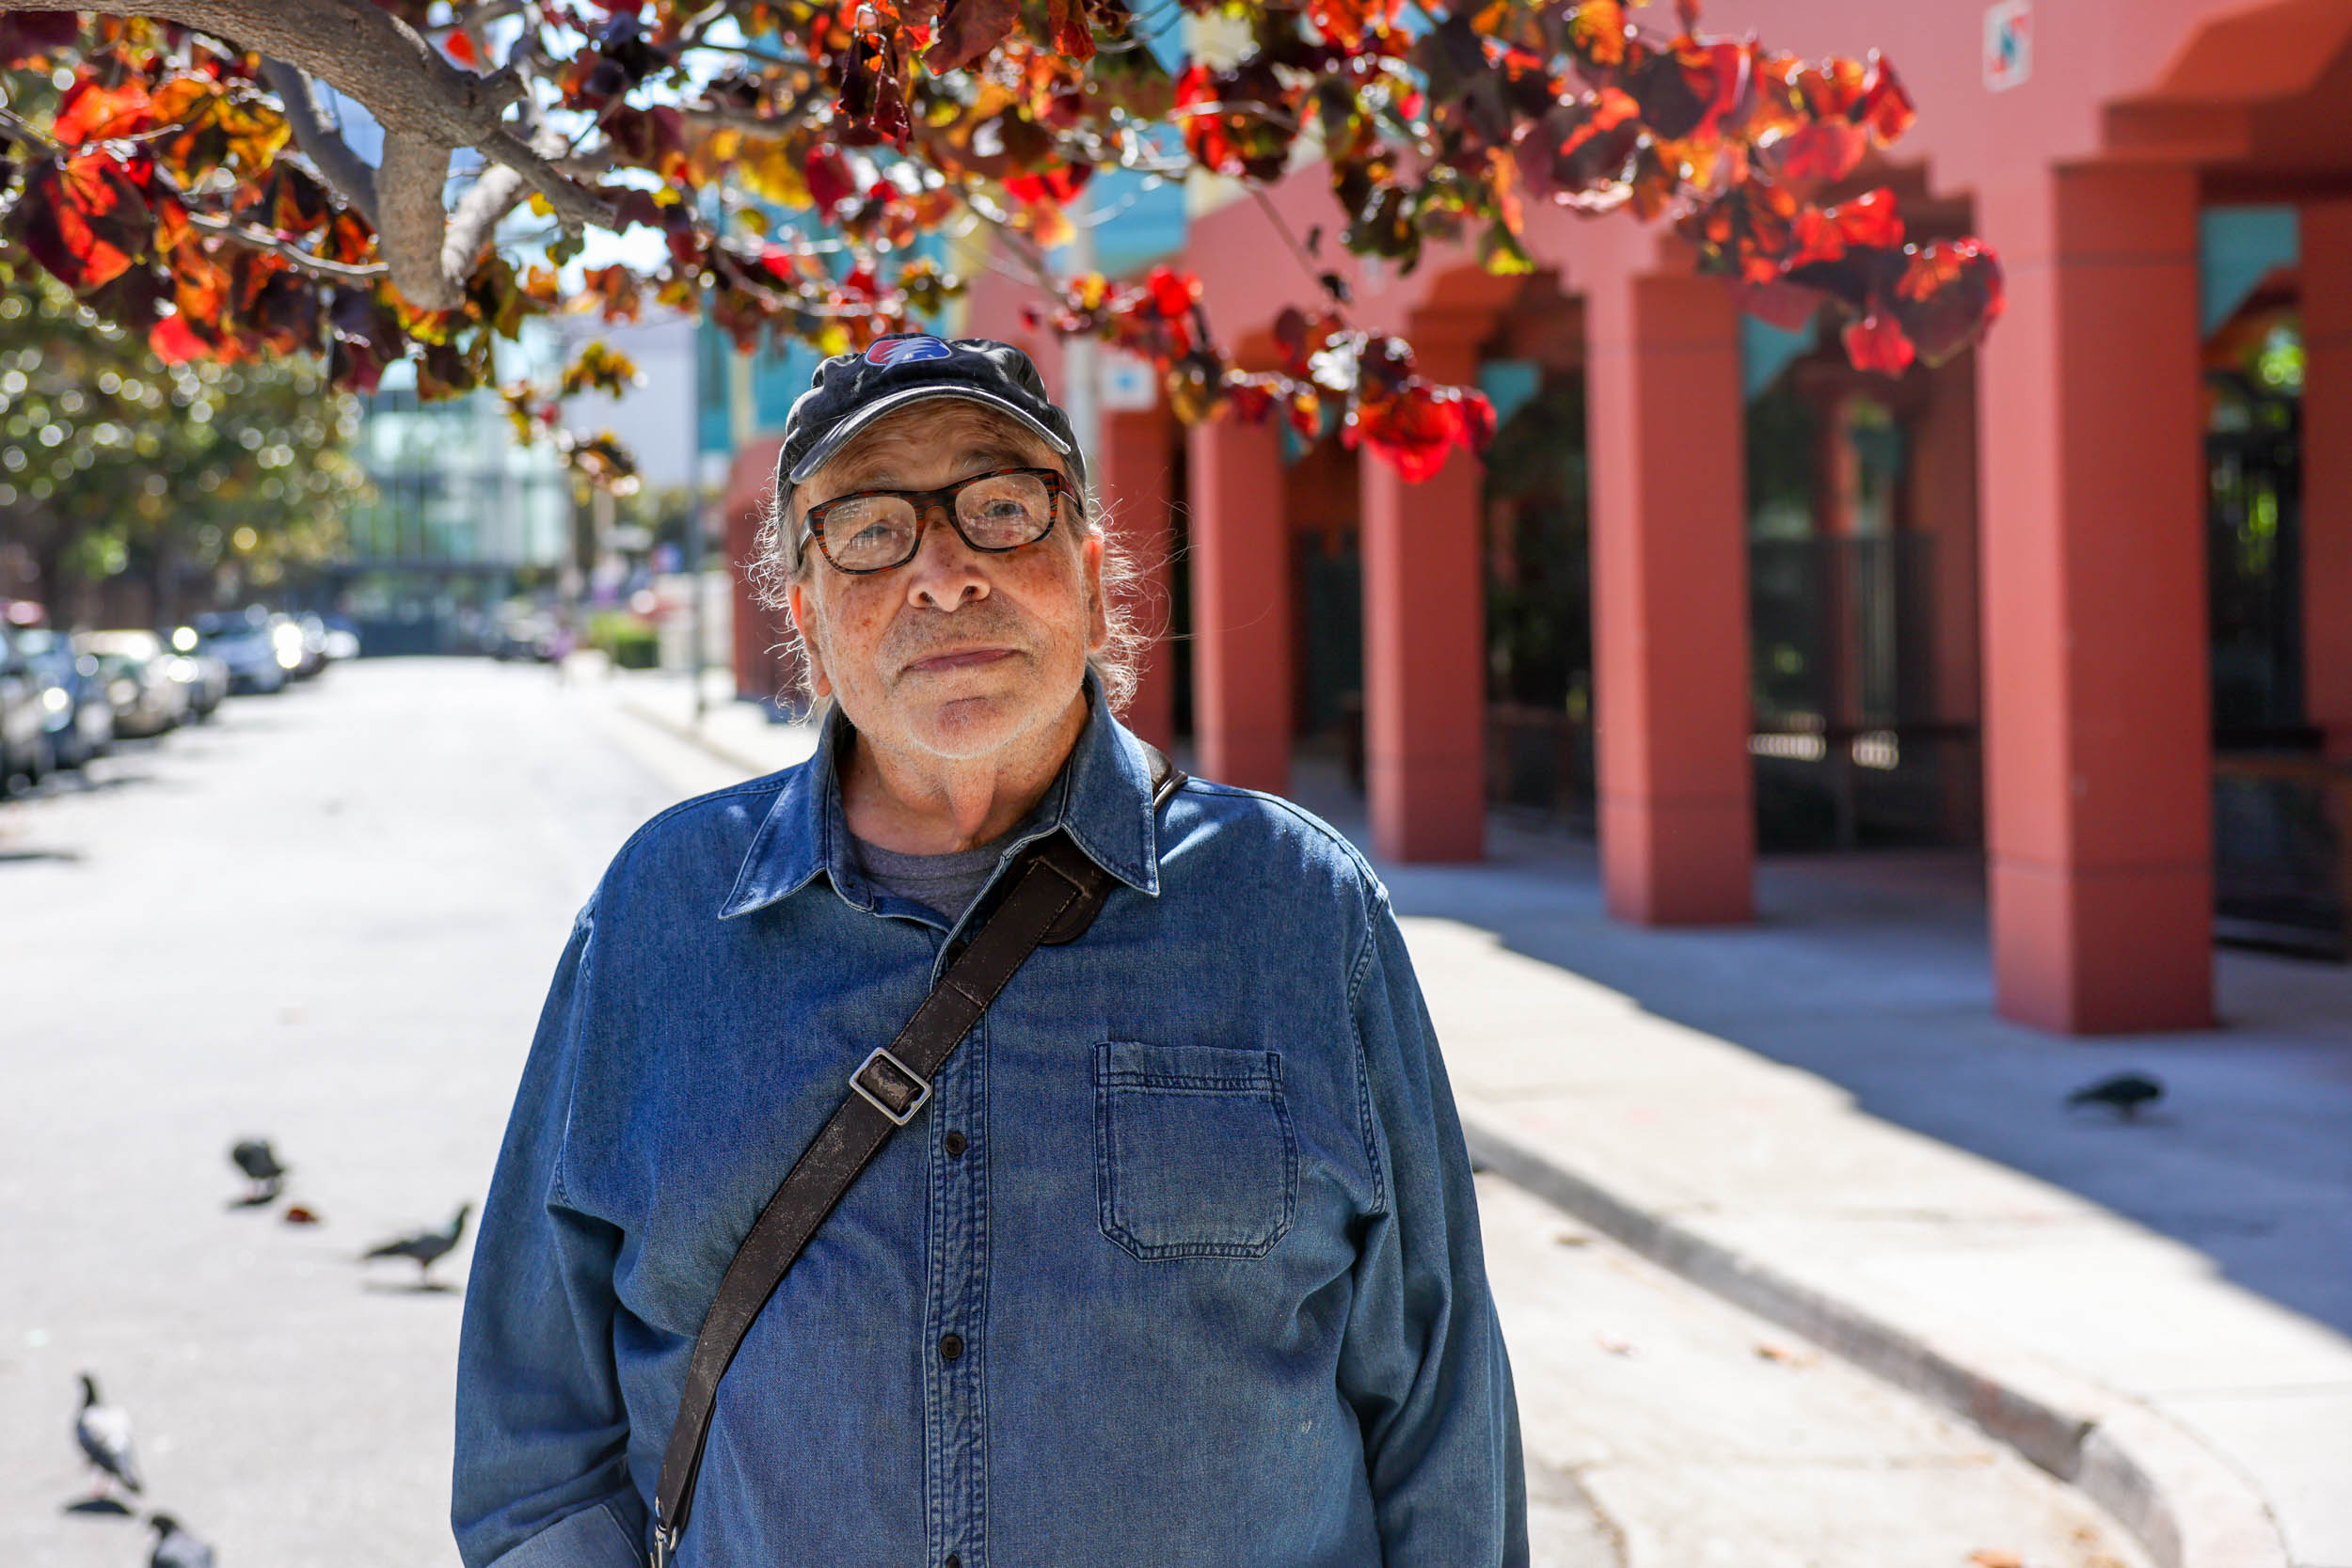 John Elberling in a denim jacket stands on a sunny street with red-leafed trees and buildings behind him.